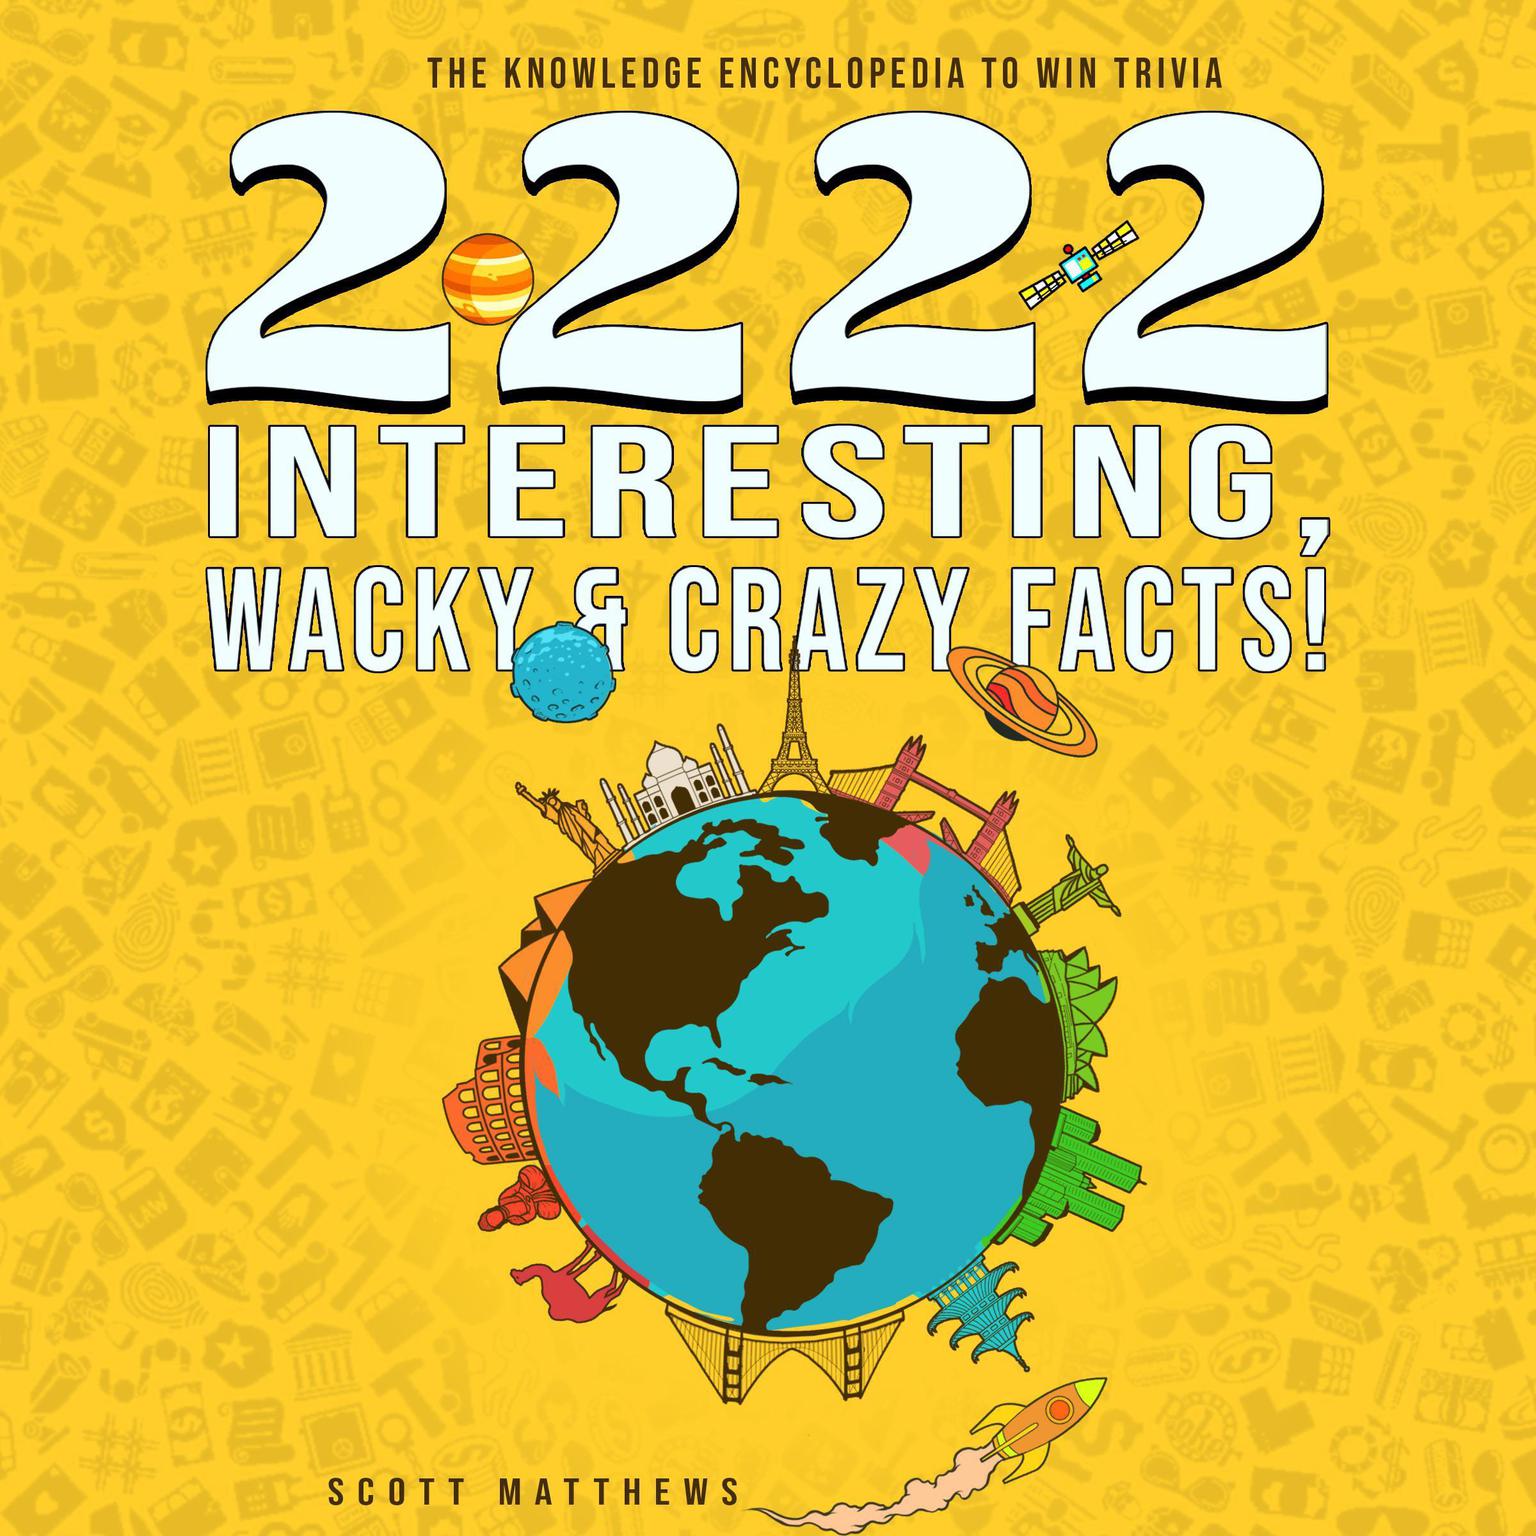 2222 Interesting, Wacky & Crazy Facts - The Knowledge Encyclopedia To Win Trivia Audiobook, by Scott Matthews